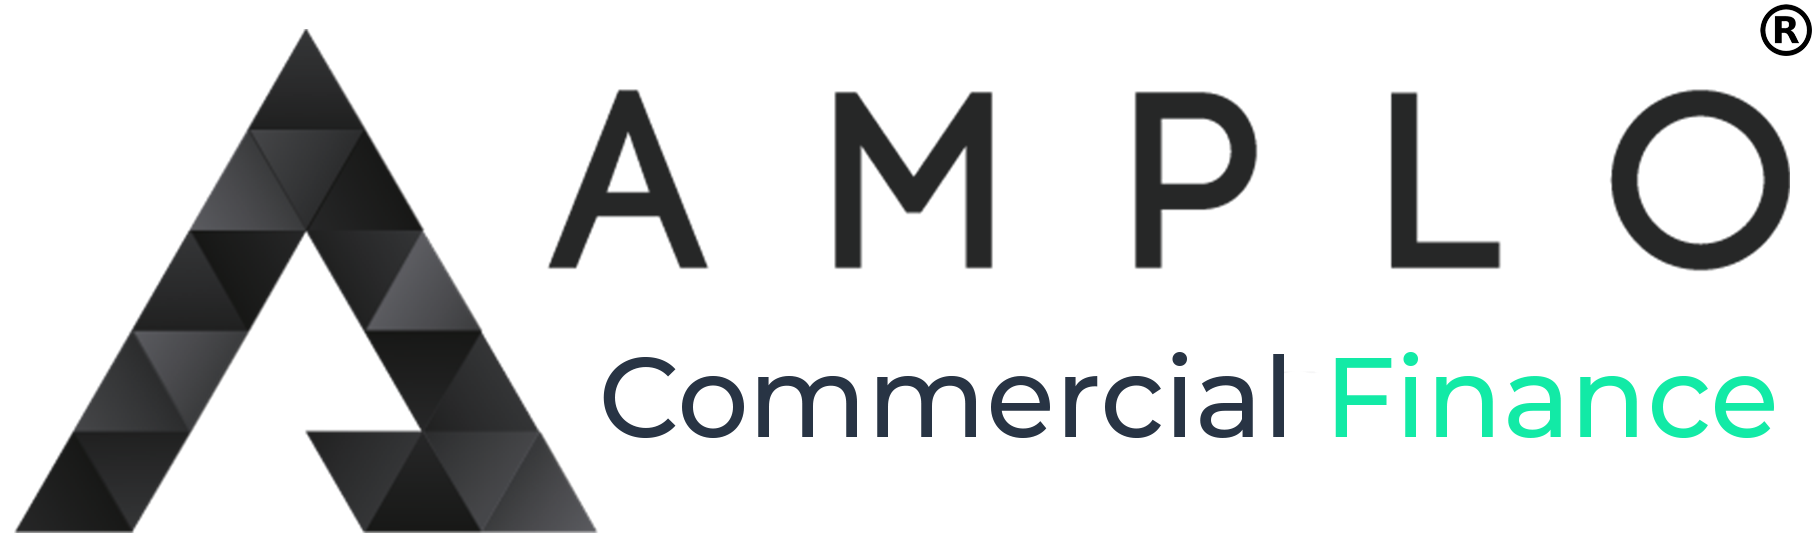 Amplo Commercial Finance